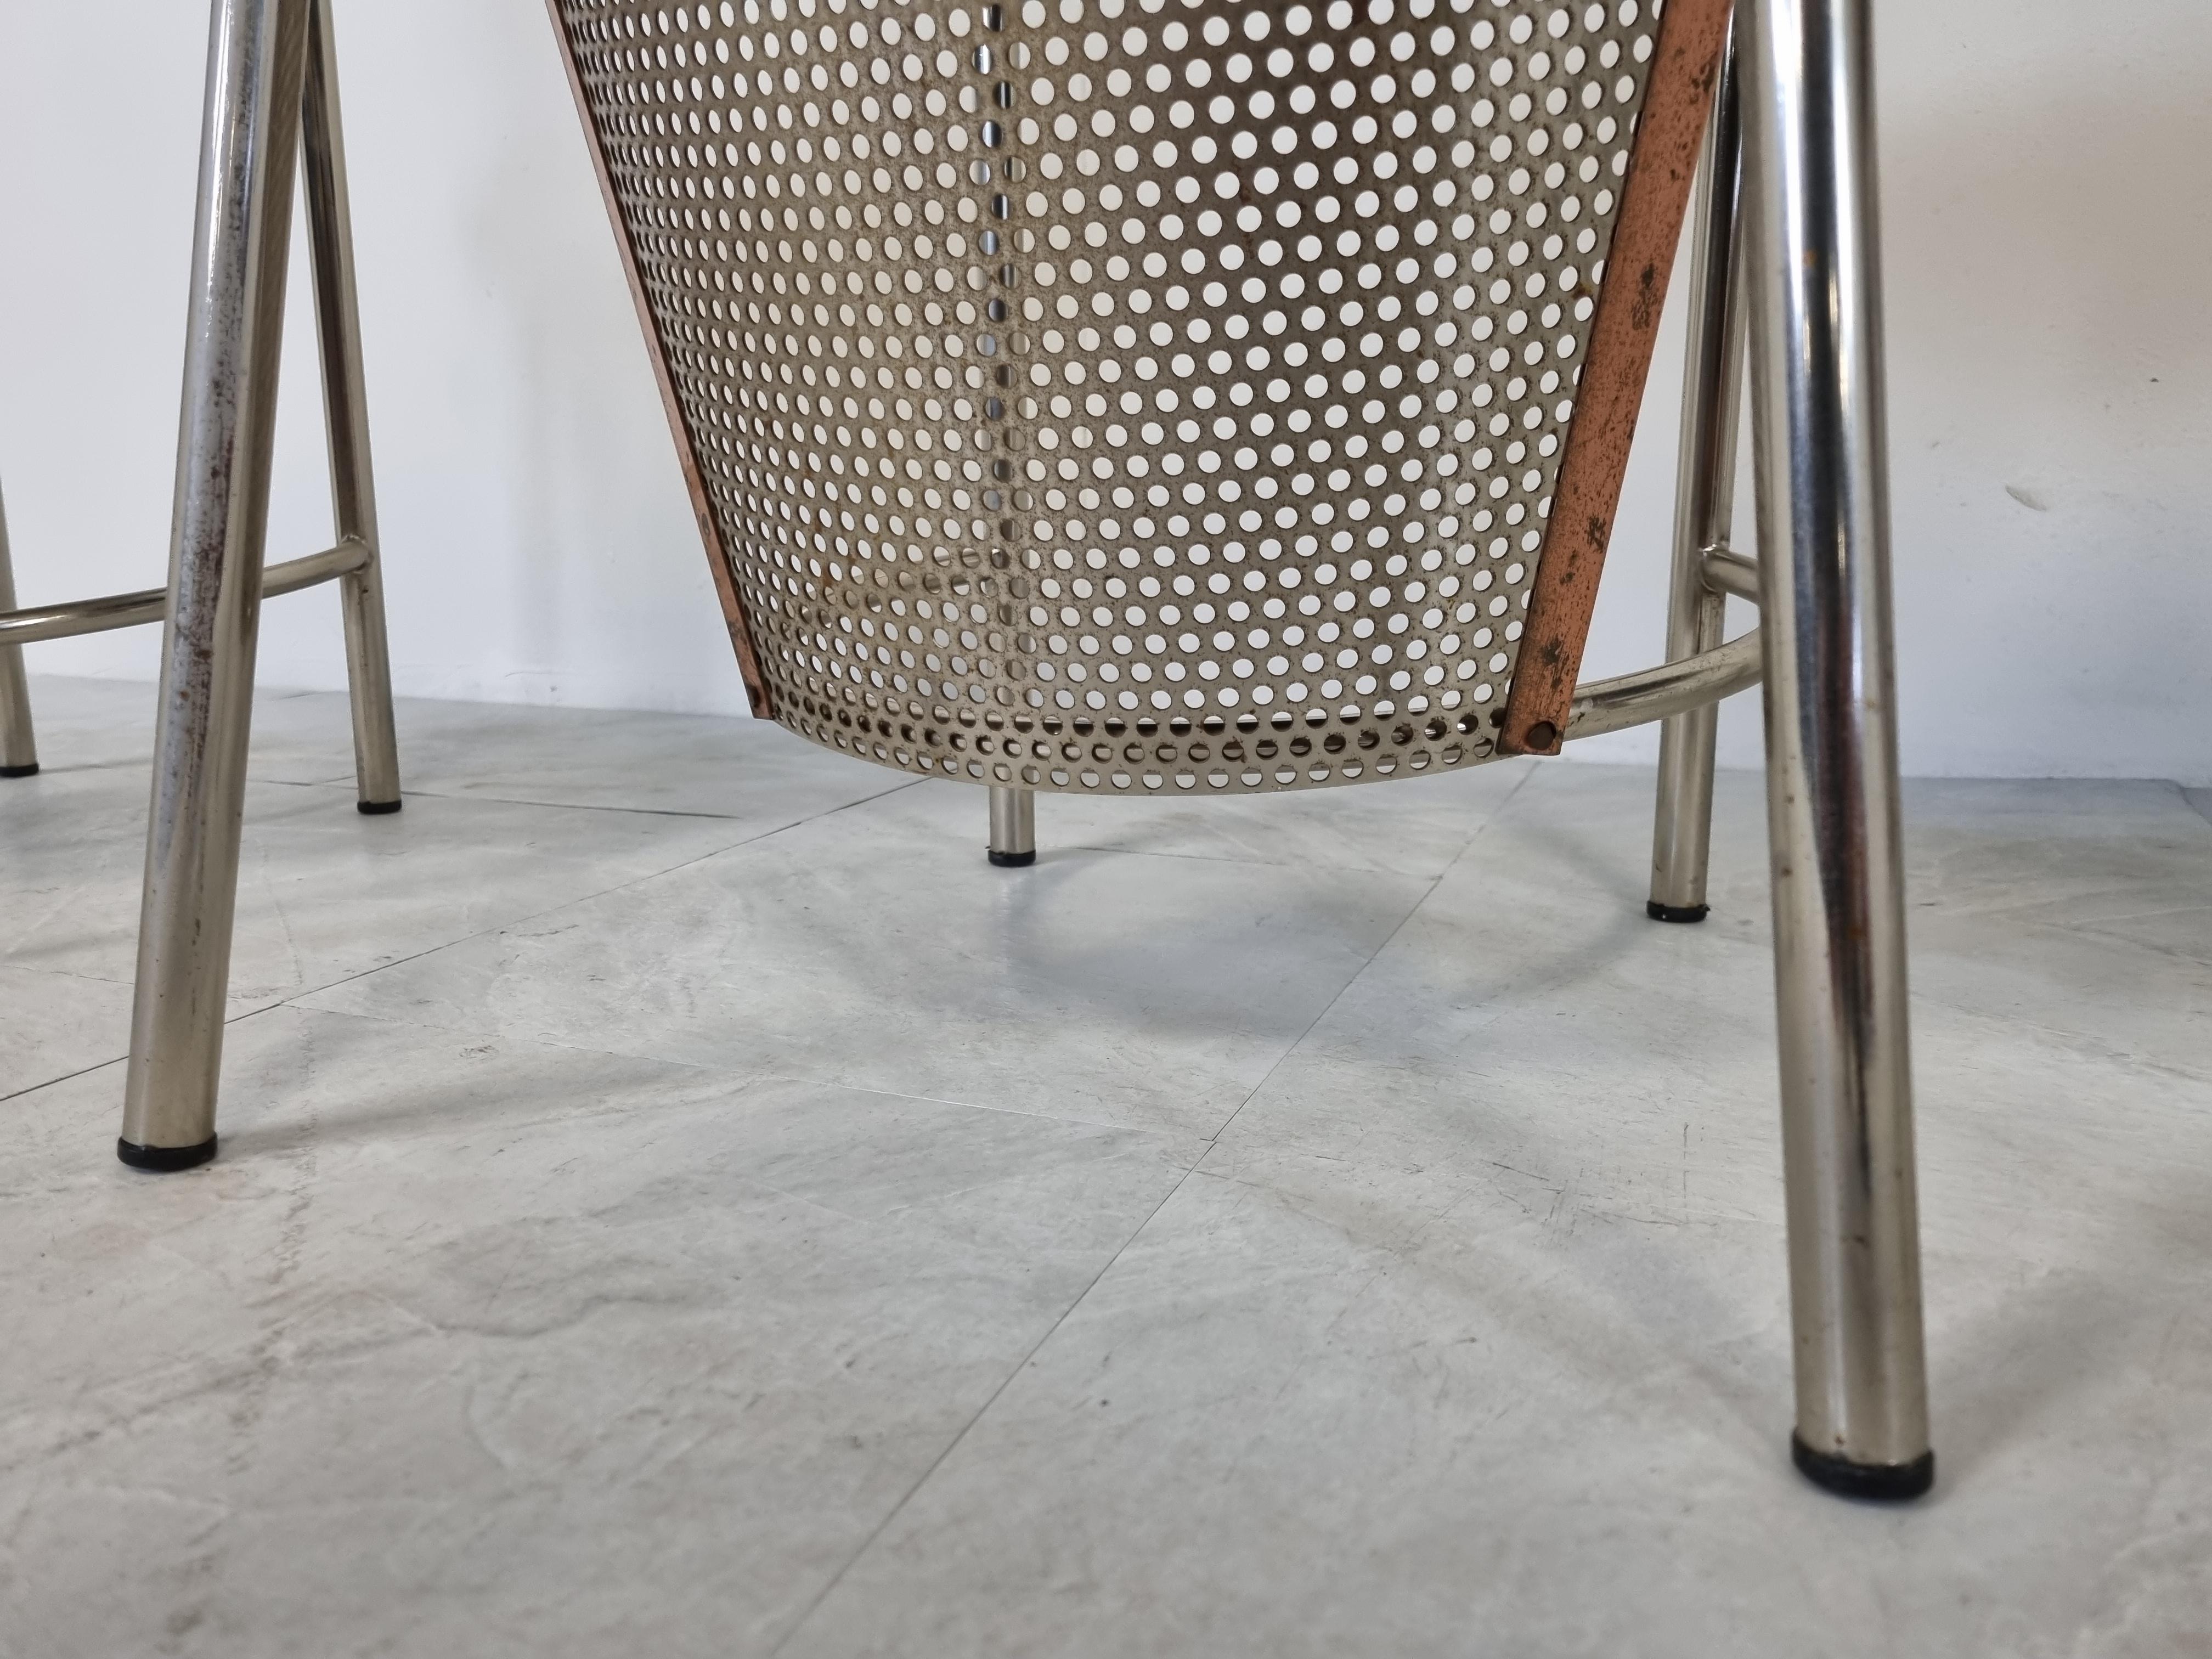 Set of four perforated metal dining chairs designed by Frans Van Praet for belgochrom.

These chairs where designed for the world expo of 1992 in Sevilla.

The chairs have a beautiful geometric design and the seats have white upholstery.

The